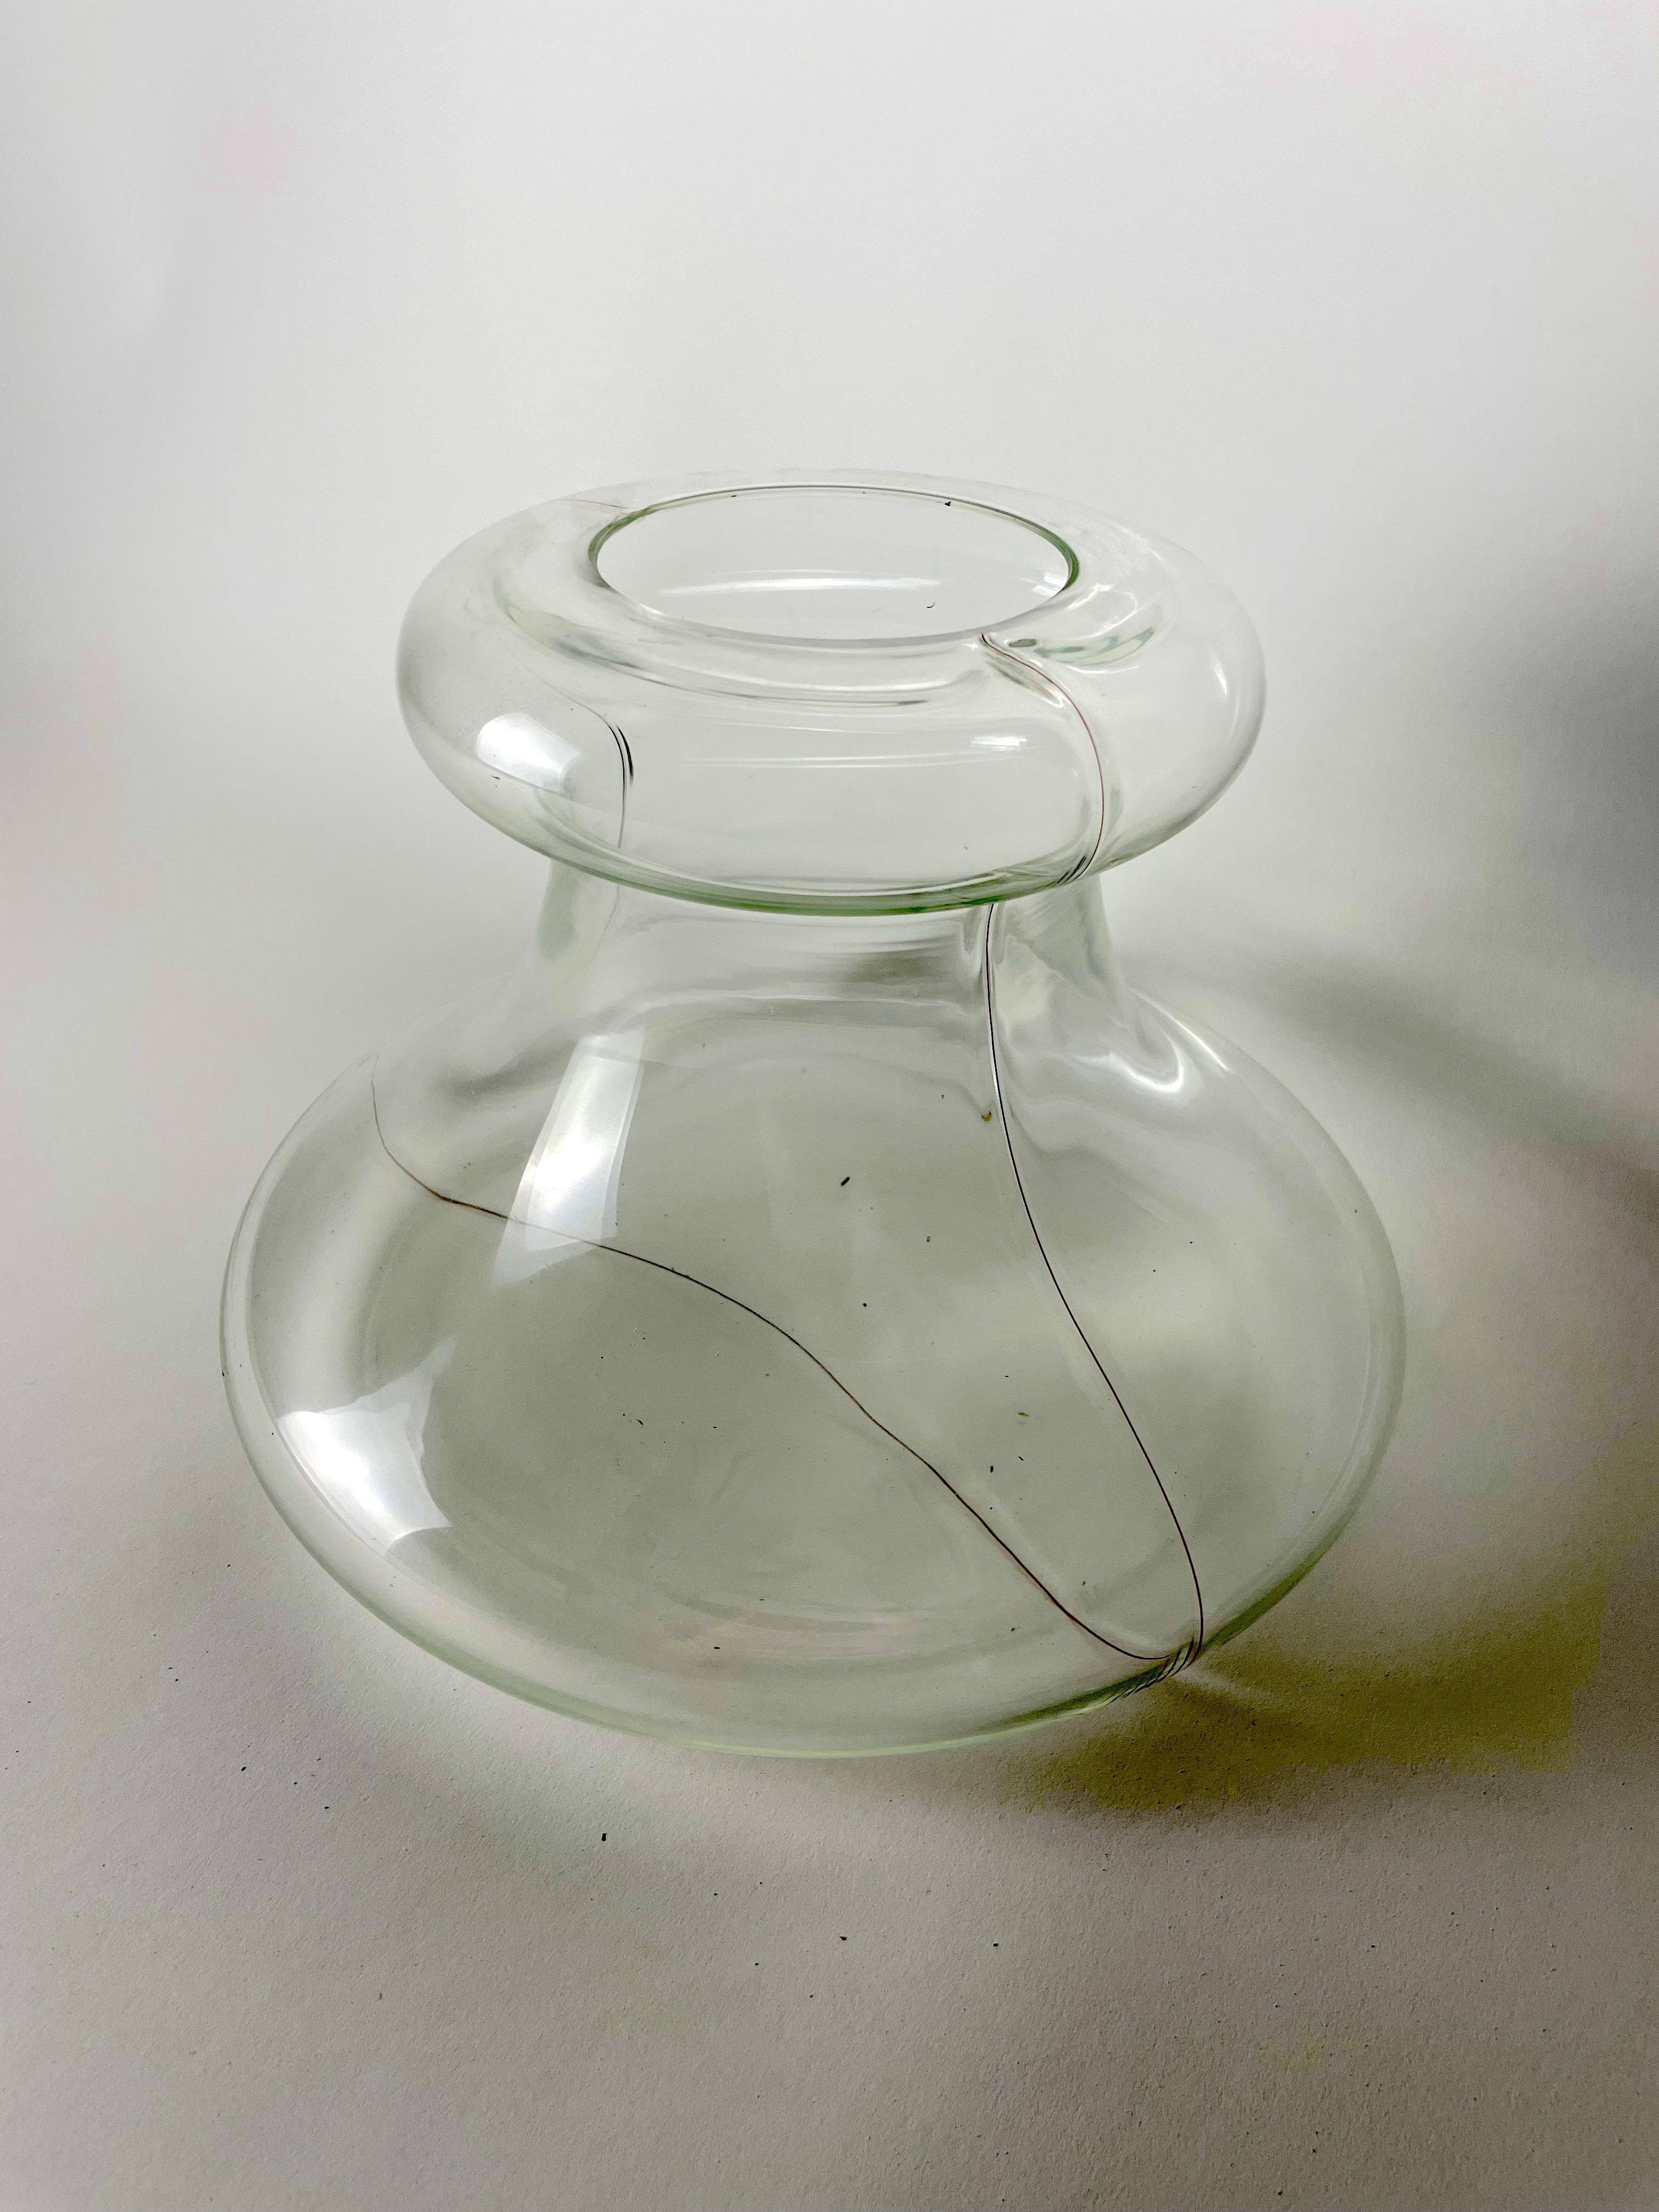 Bask in the splendor of 'PARTY', an exquisite piece of craftsmanship from designer Renato Toso for Fratelli Toso. This crystal hand-blown glass, worked and decorated freehand, is a stunning testament to the minimalistic philosophy in design. A